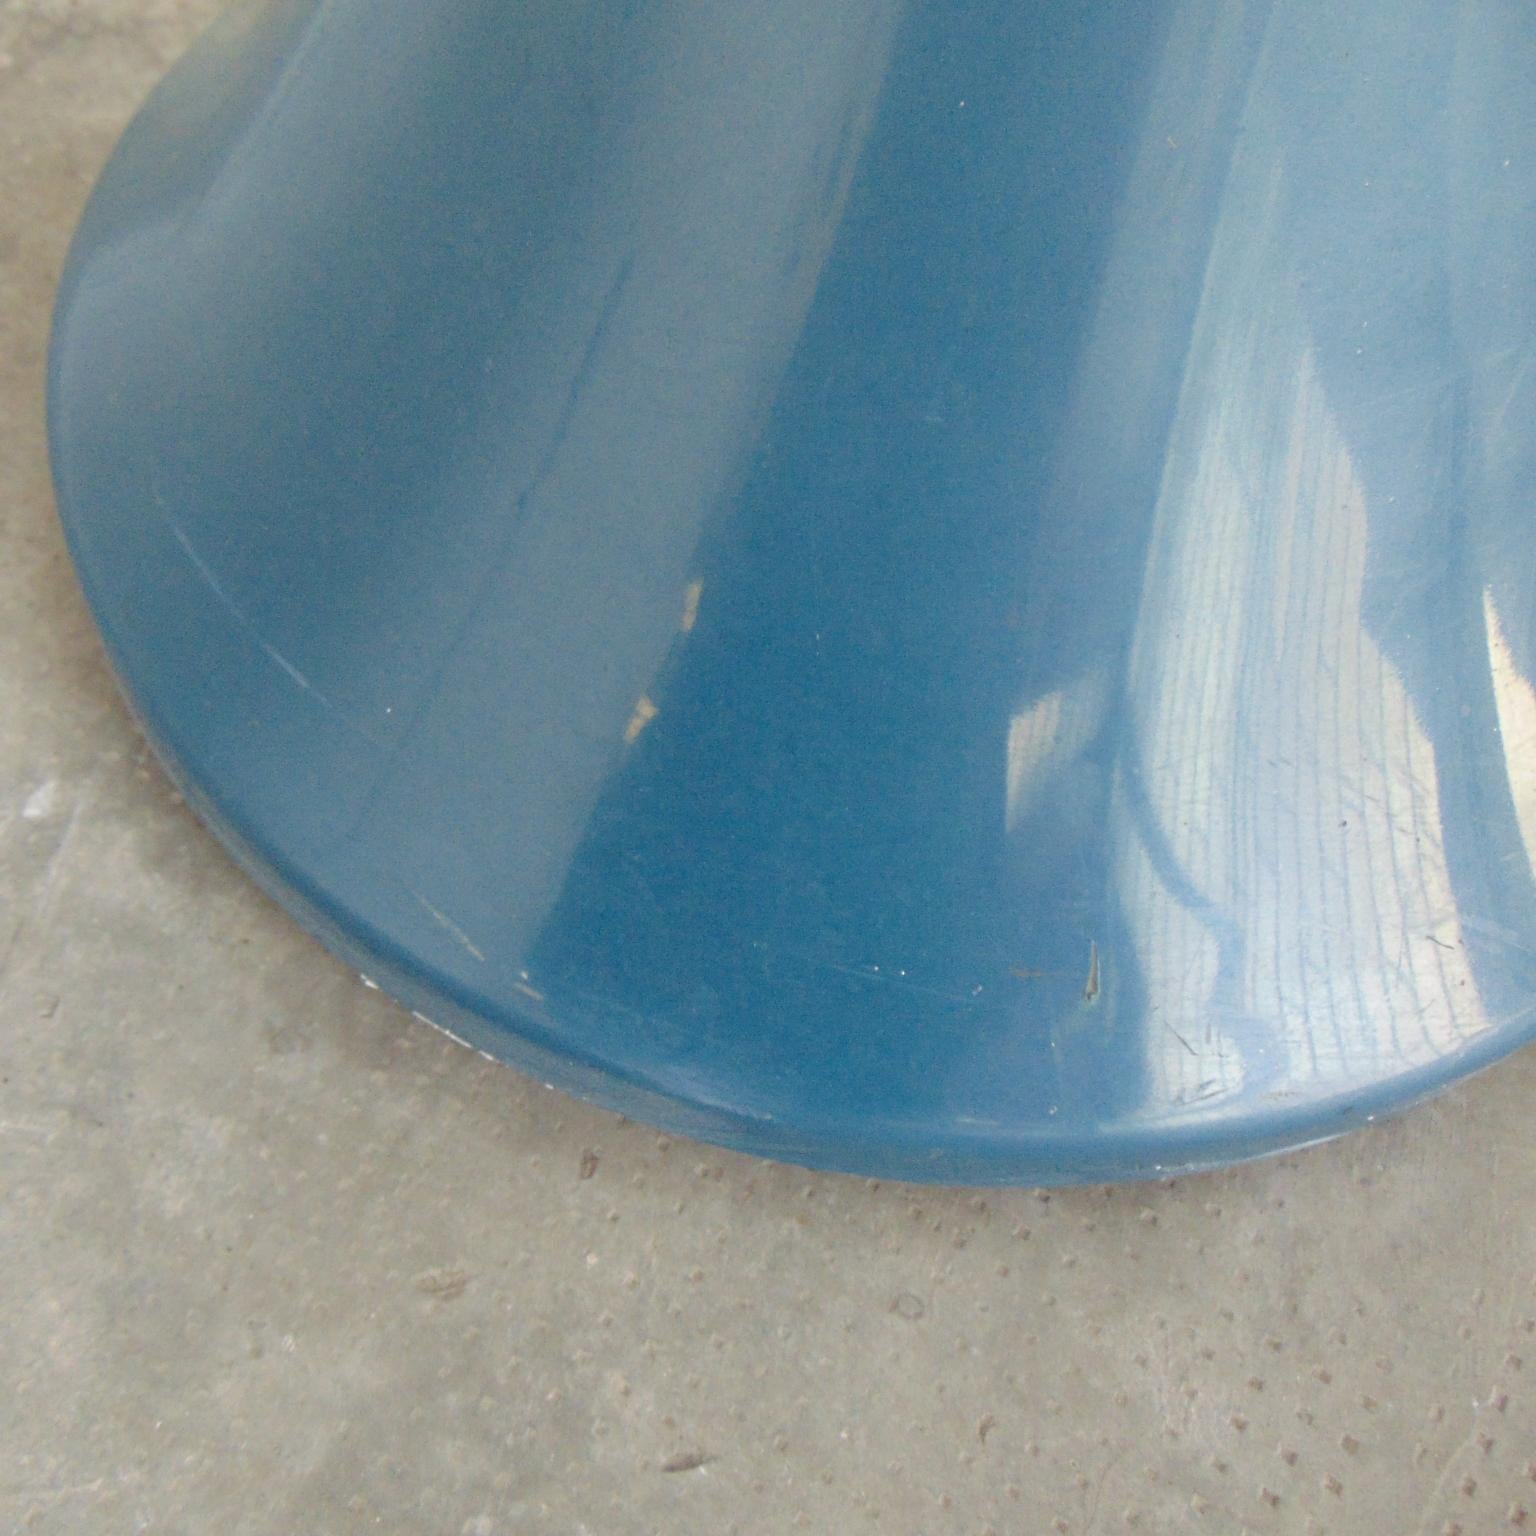 1972 Umbrella Stand in Blue Thermoformed Plastic by R. Lera for Sormani, Italy For Sale 5